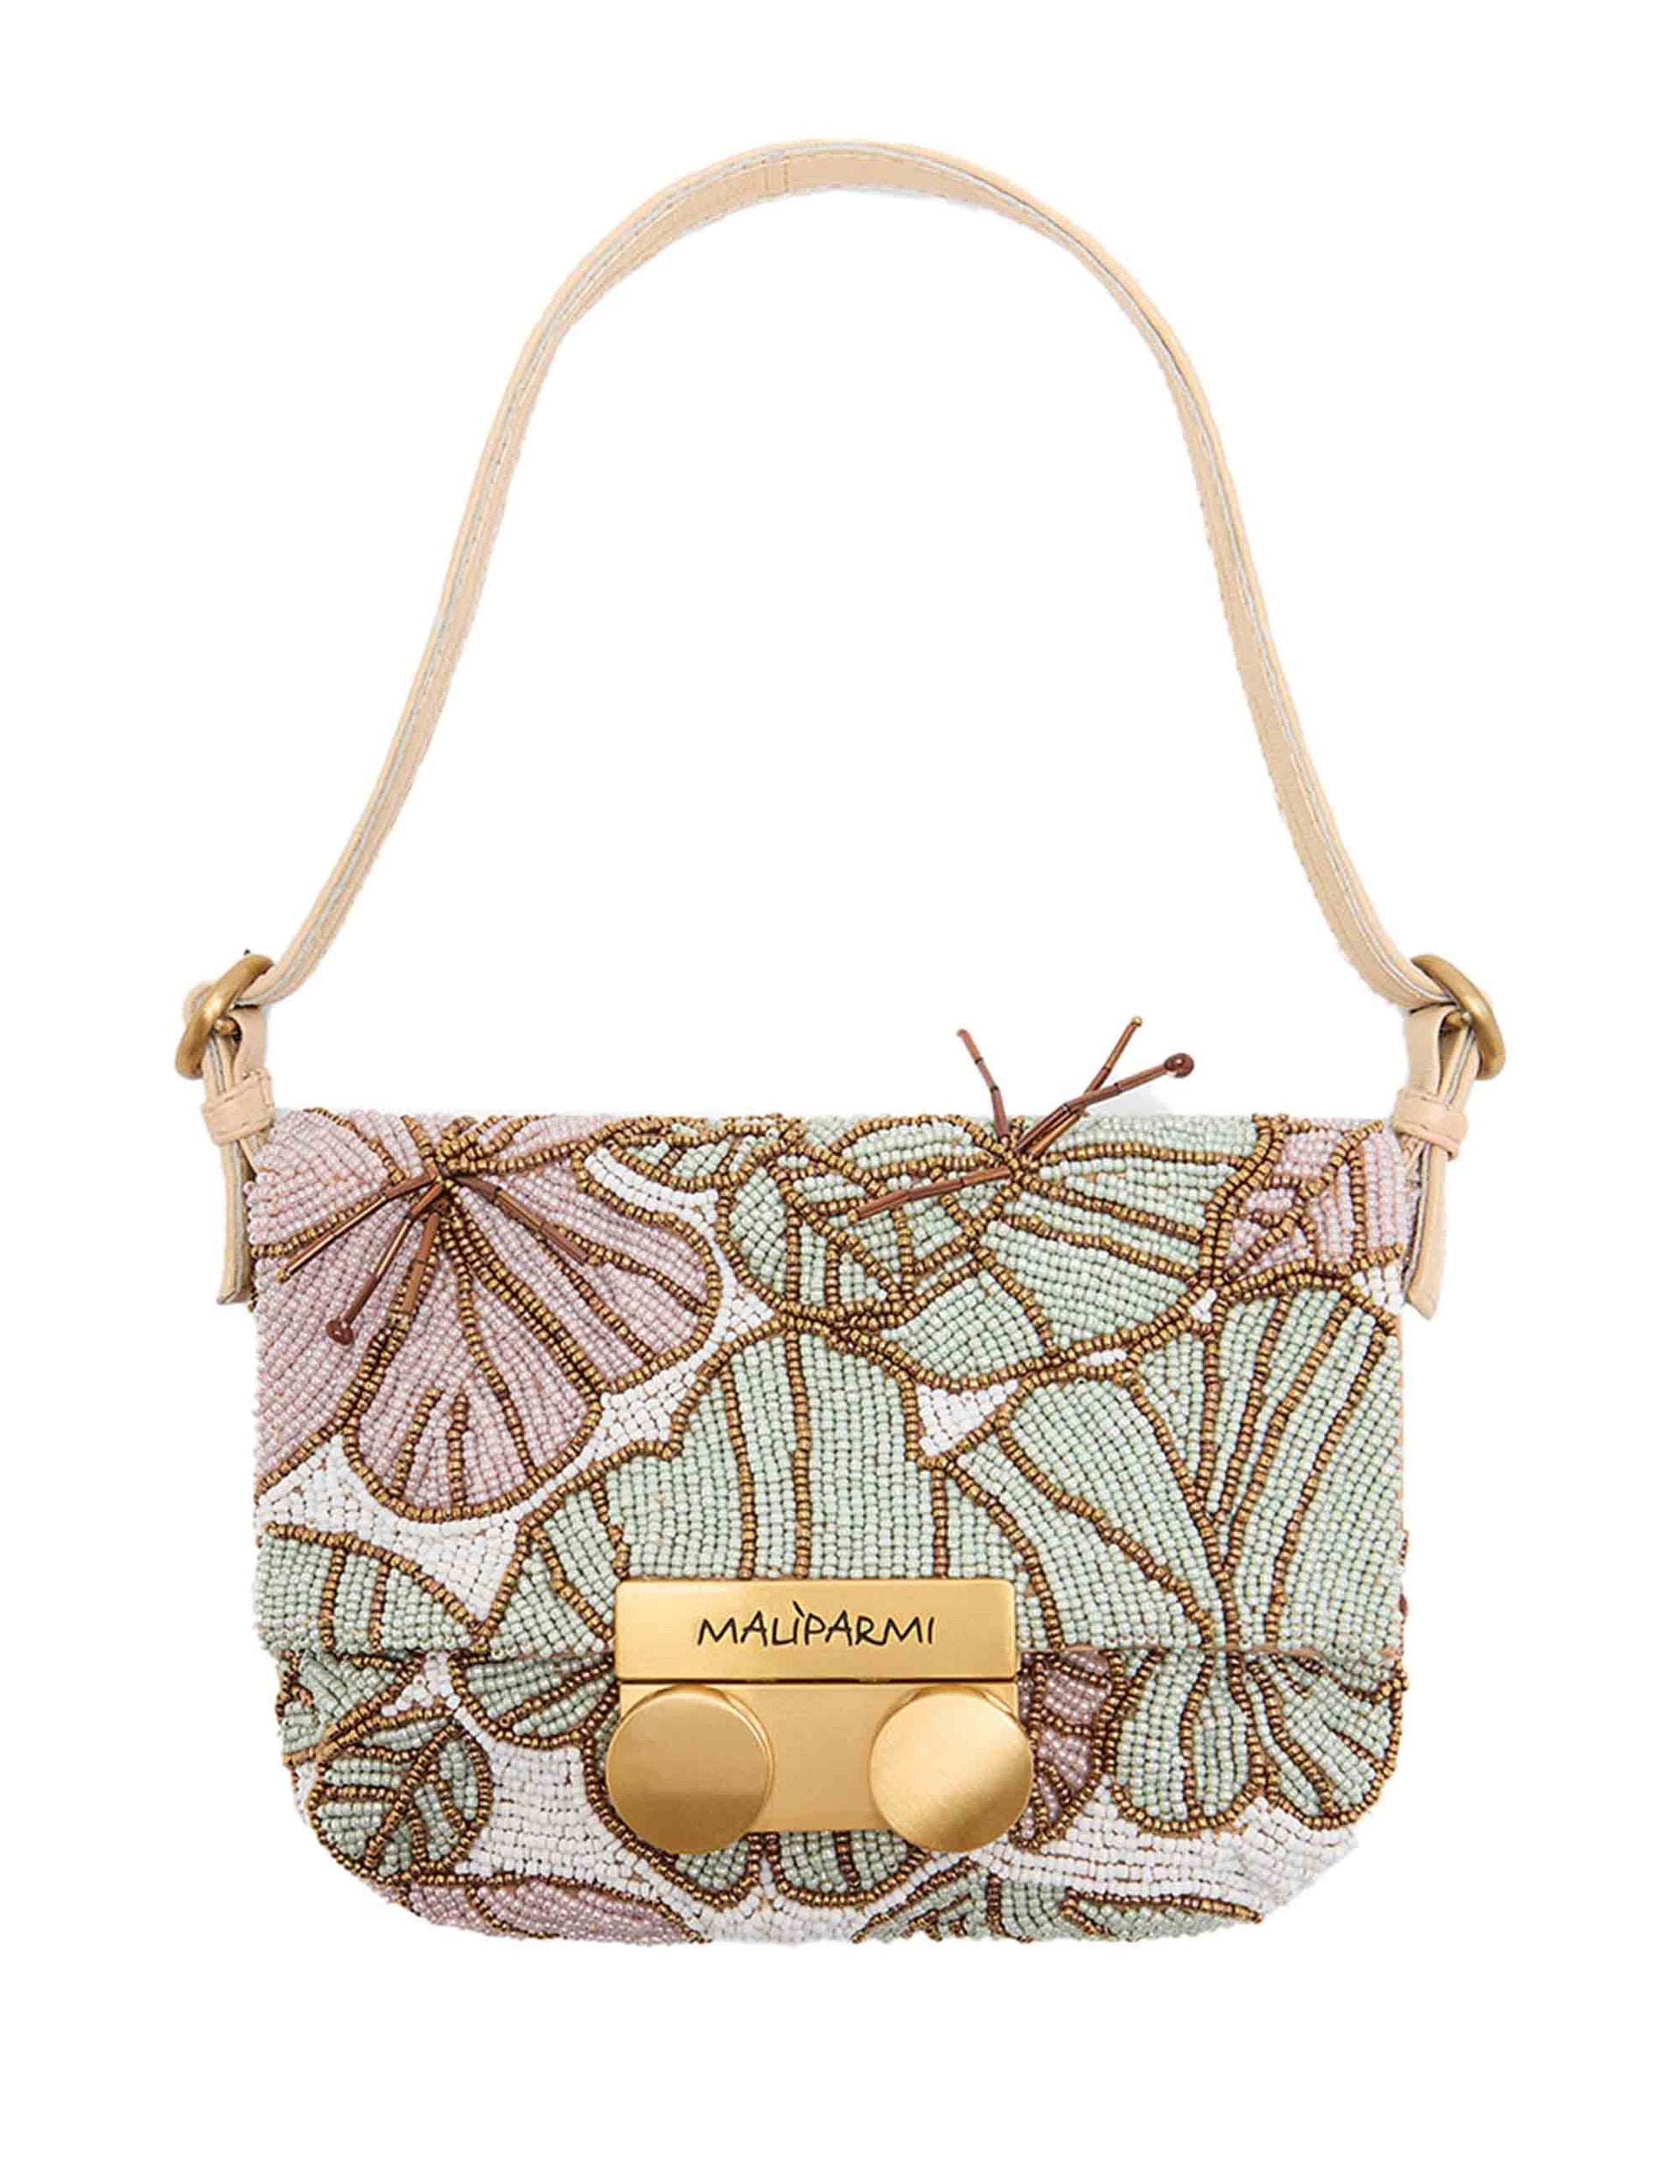 Flower Beads women's shoulder bags in natural and green beads